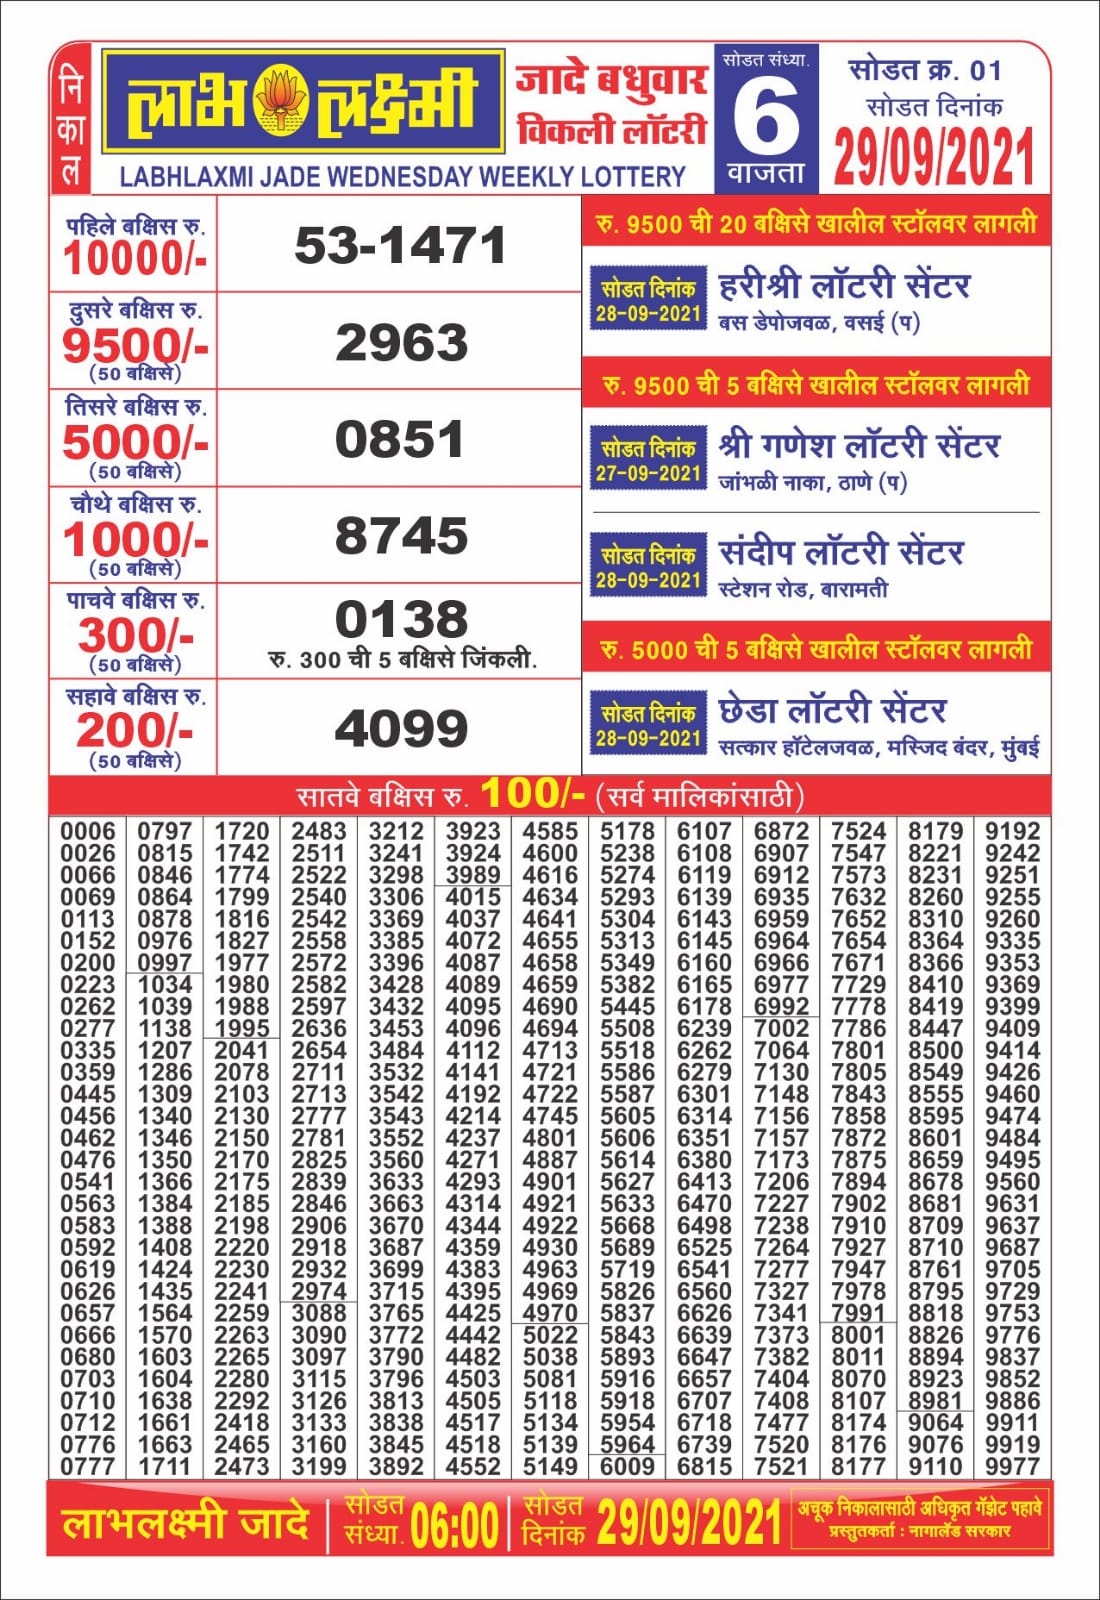 Labhlaxmi 6PM lottery result 29-09-2021